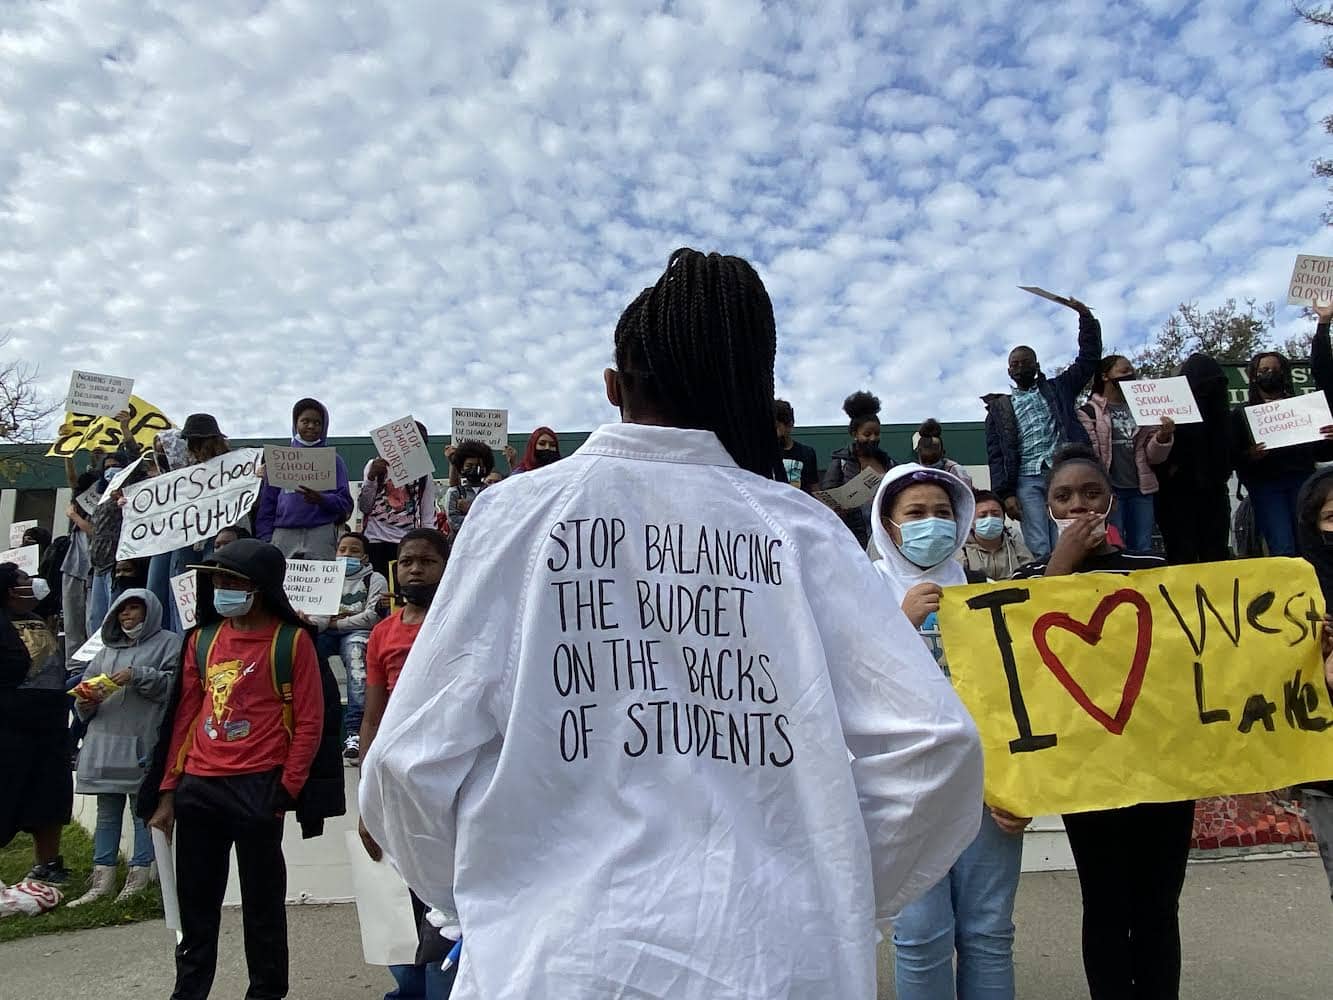 Stop-balancing-the-budget-on-the-backs-of-students-student-protest-ag-Oakland-school-closures-0222, Students, parents and community are hunger striking, protesting Oakland’s school closings in Black and Brown neighborhoods, News & Views 